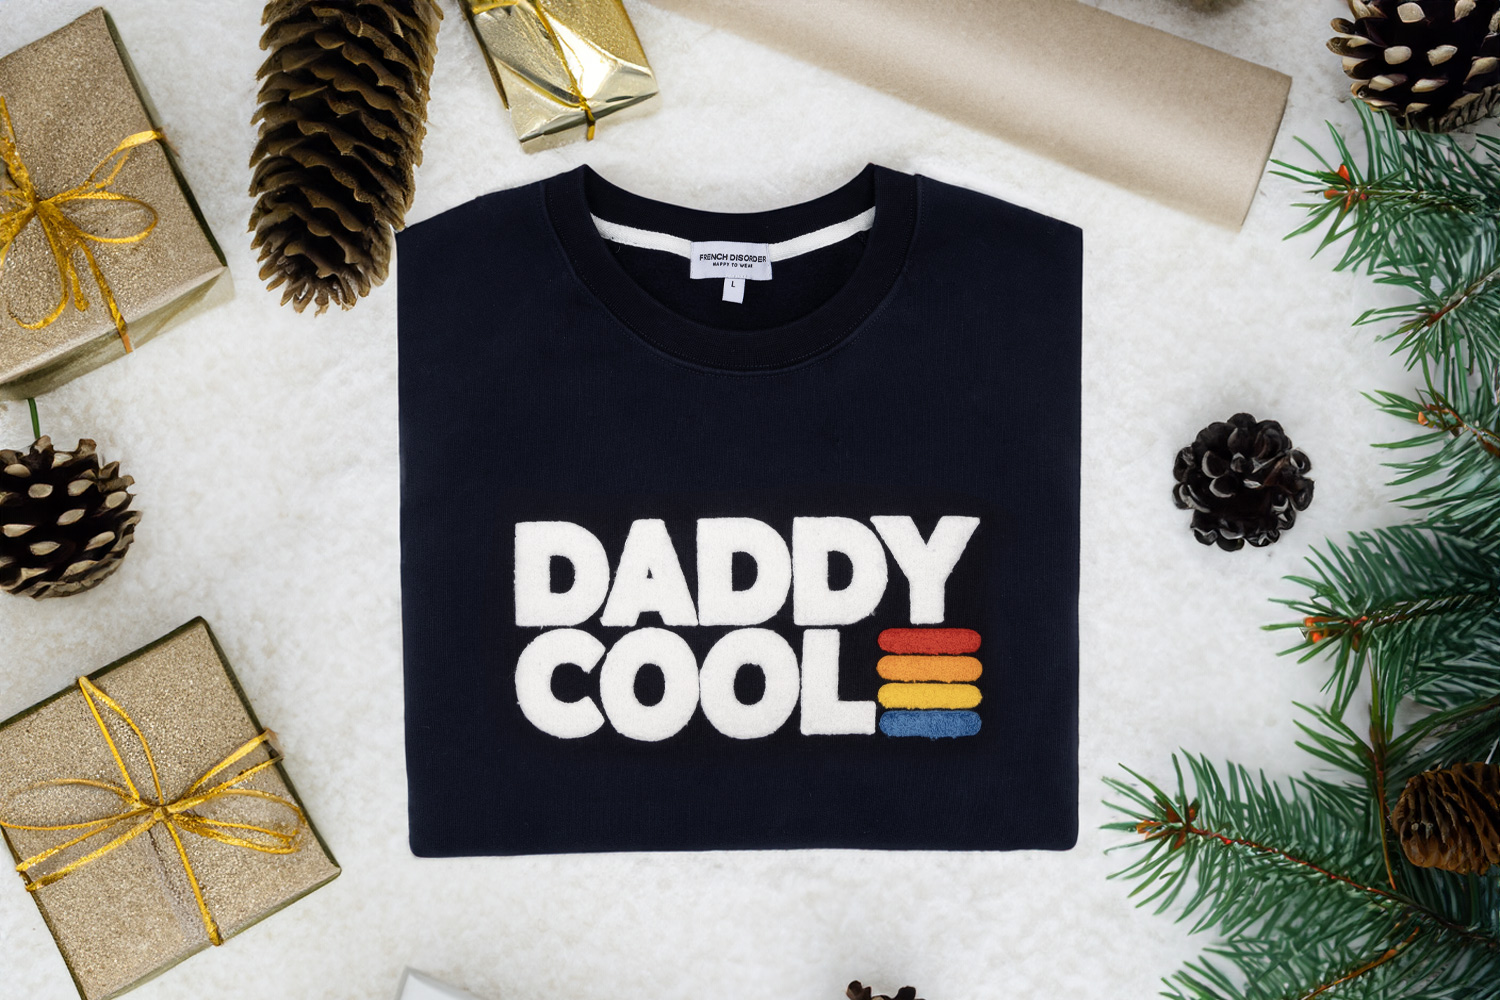 sweat homme avec broderie DADDY COOL by French Disorder